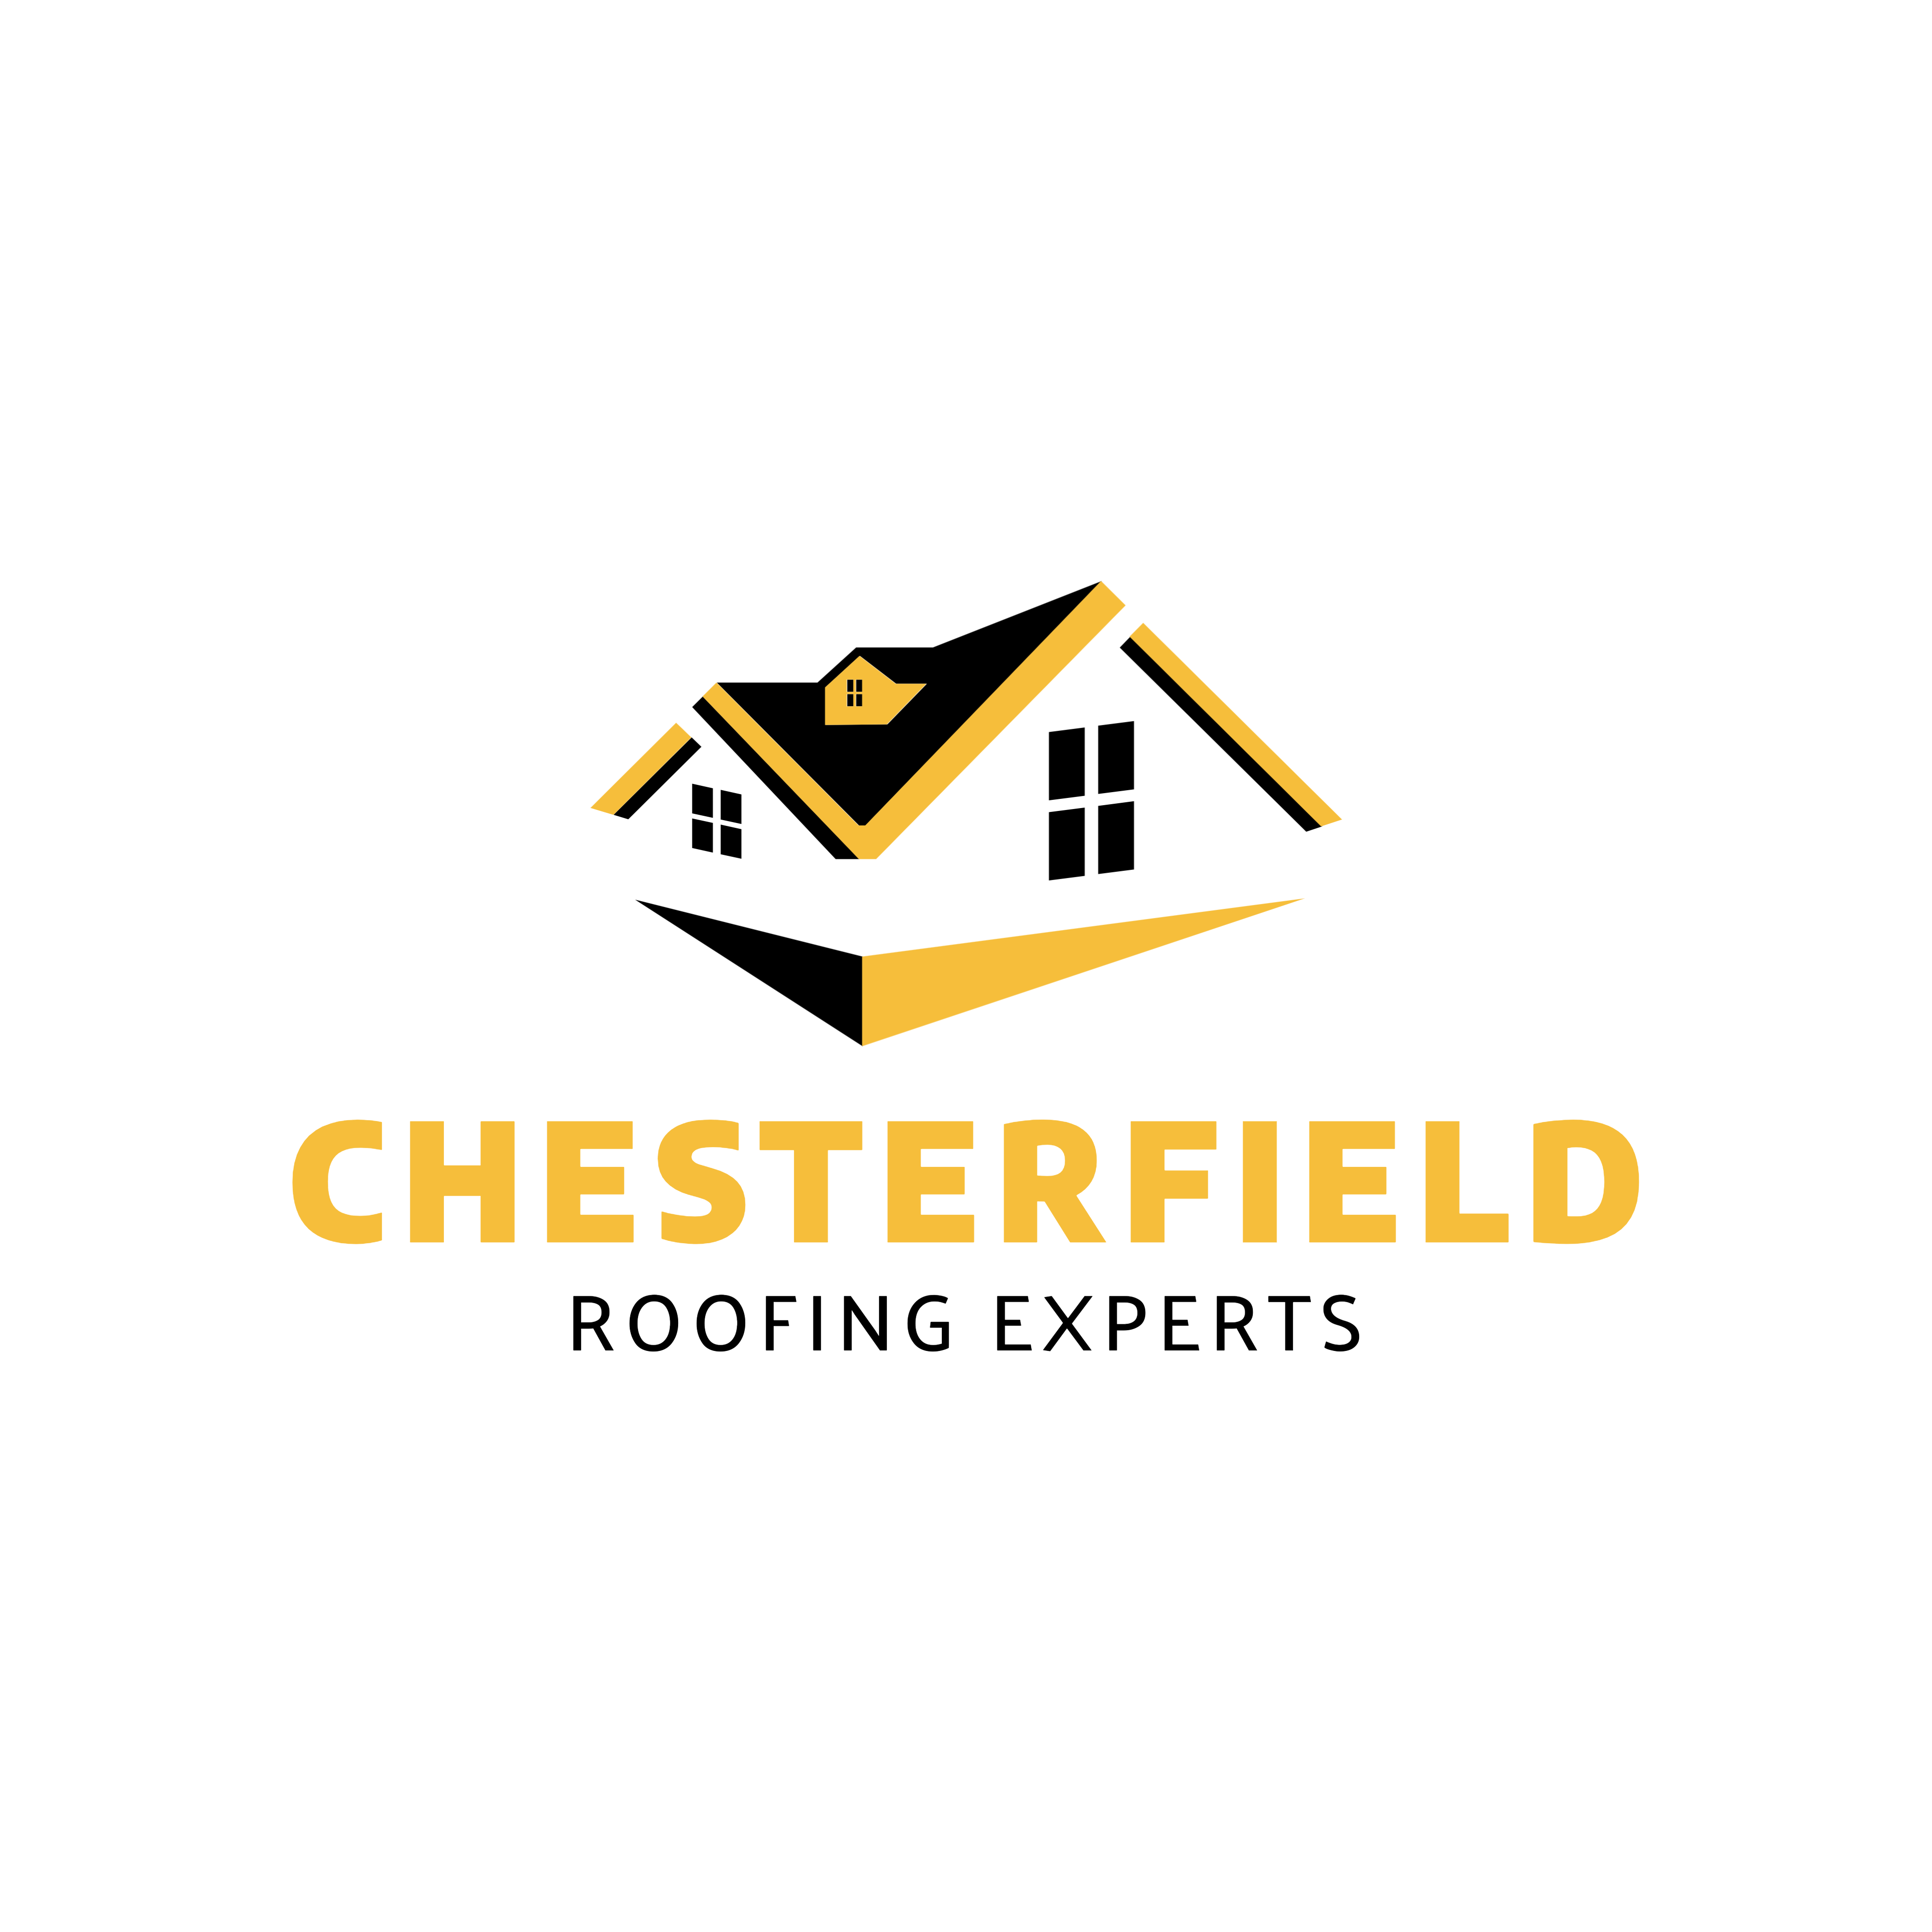 residential-roofing-company-logo-template-1481e (15)